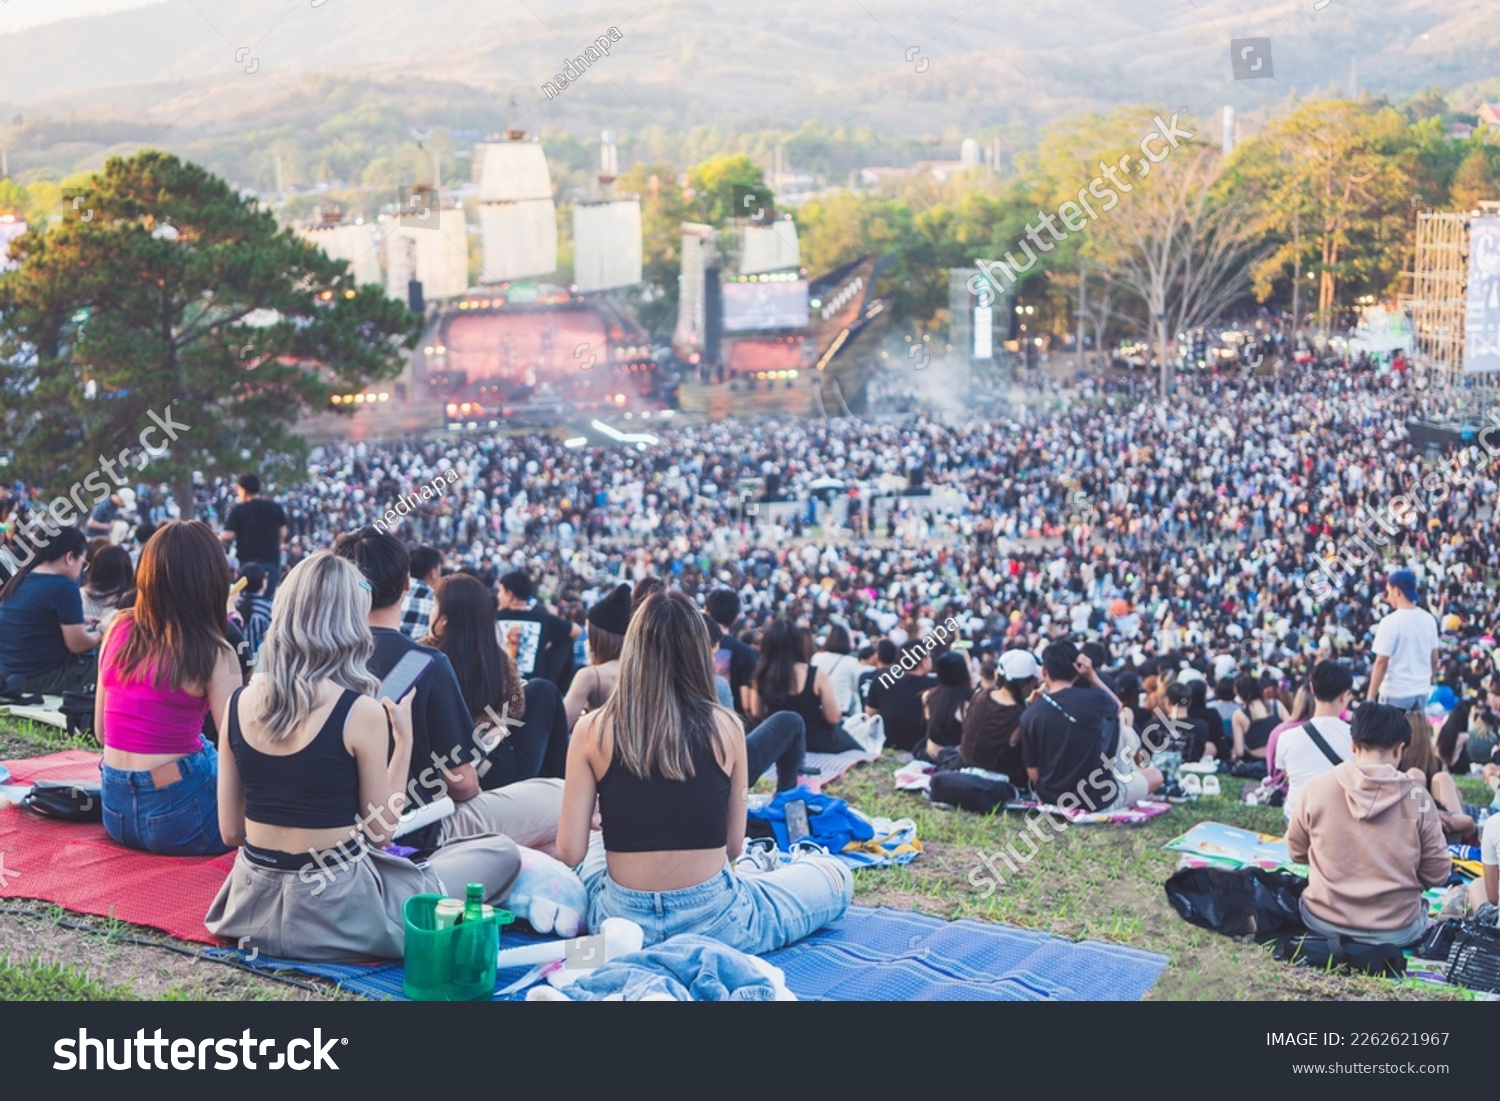 Group of young women watching concert in the park at open air music festival, back view. #2262621967